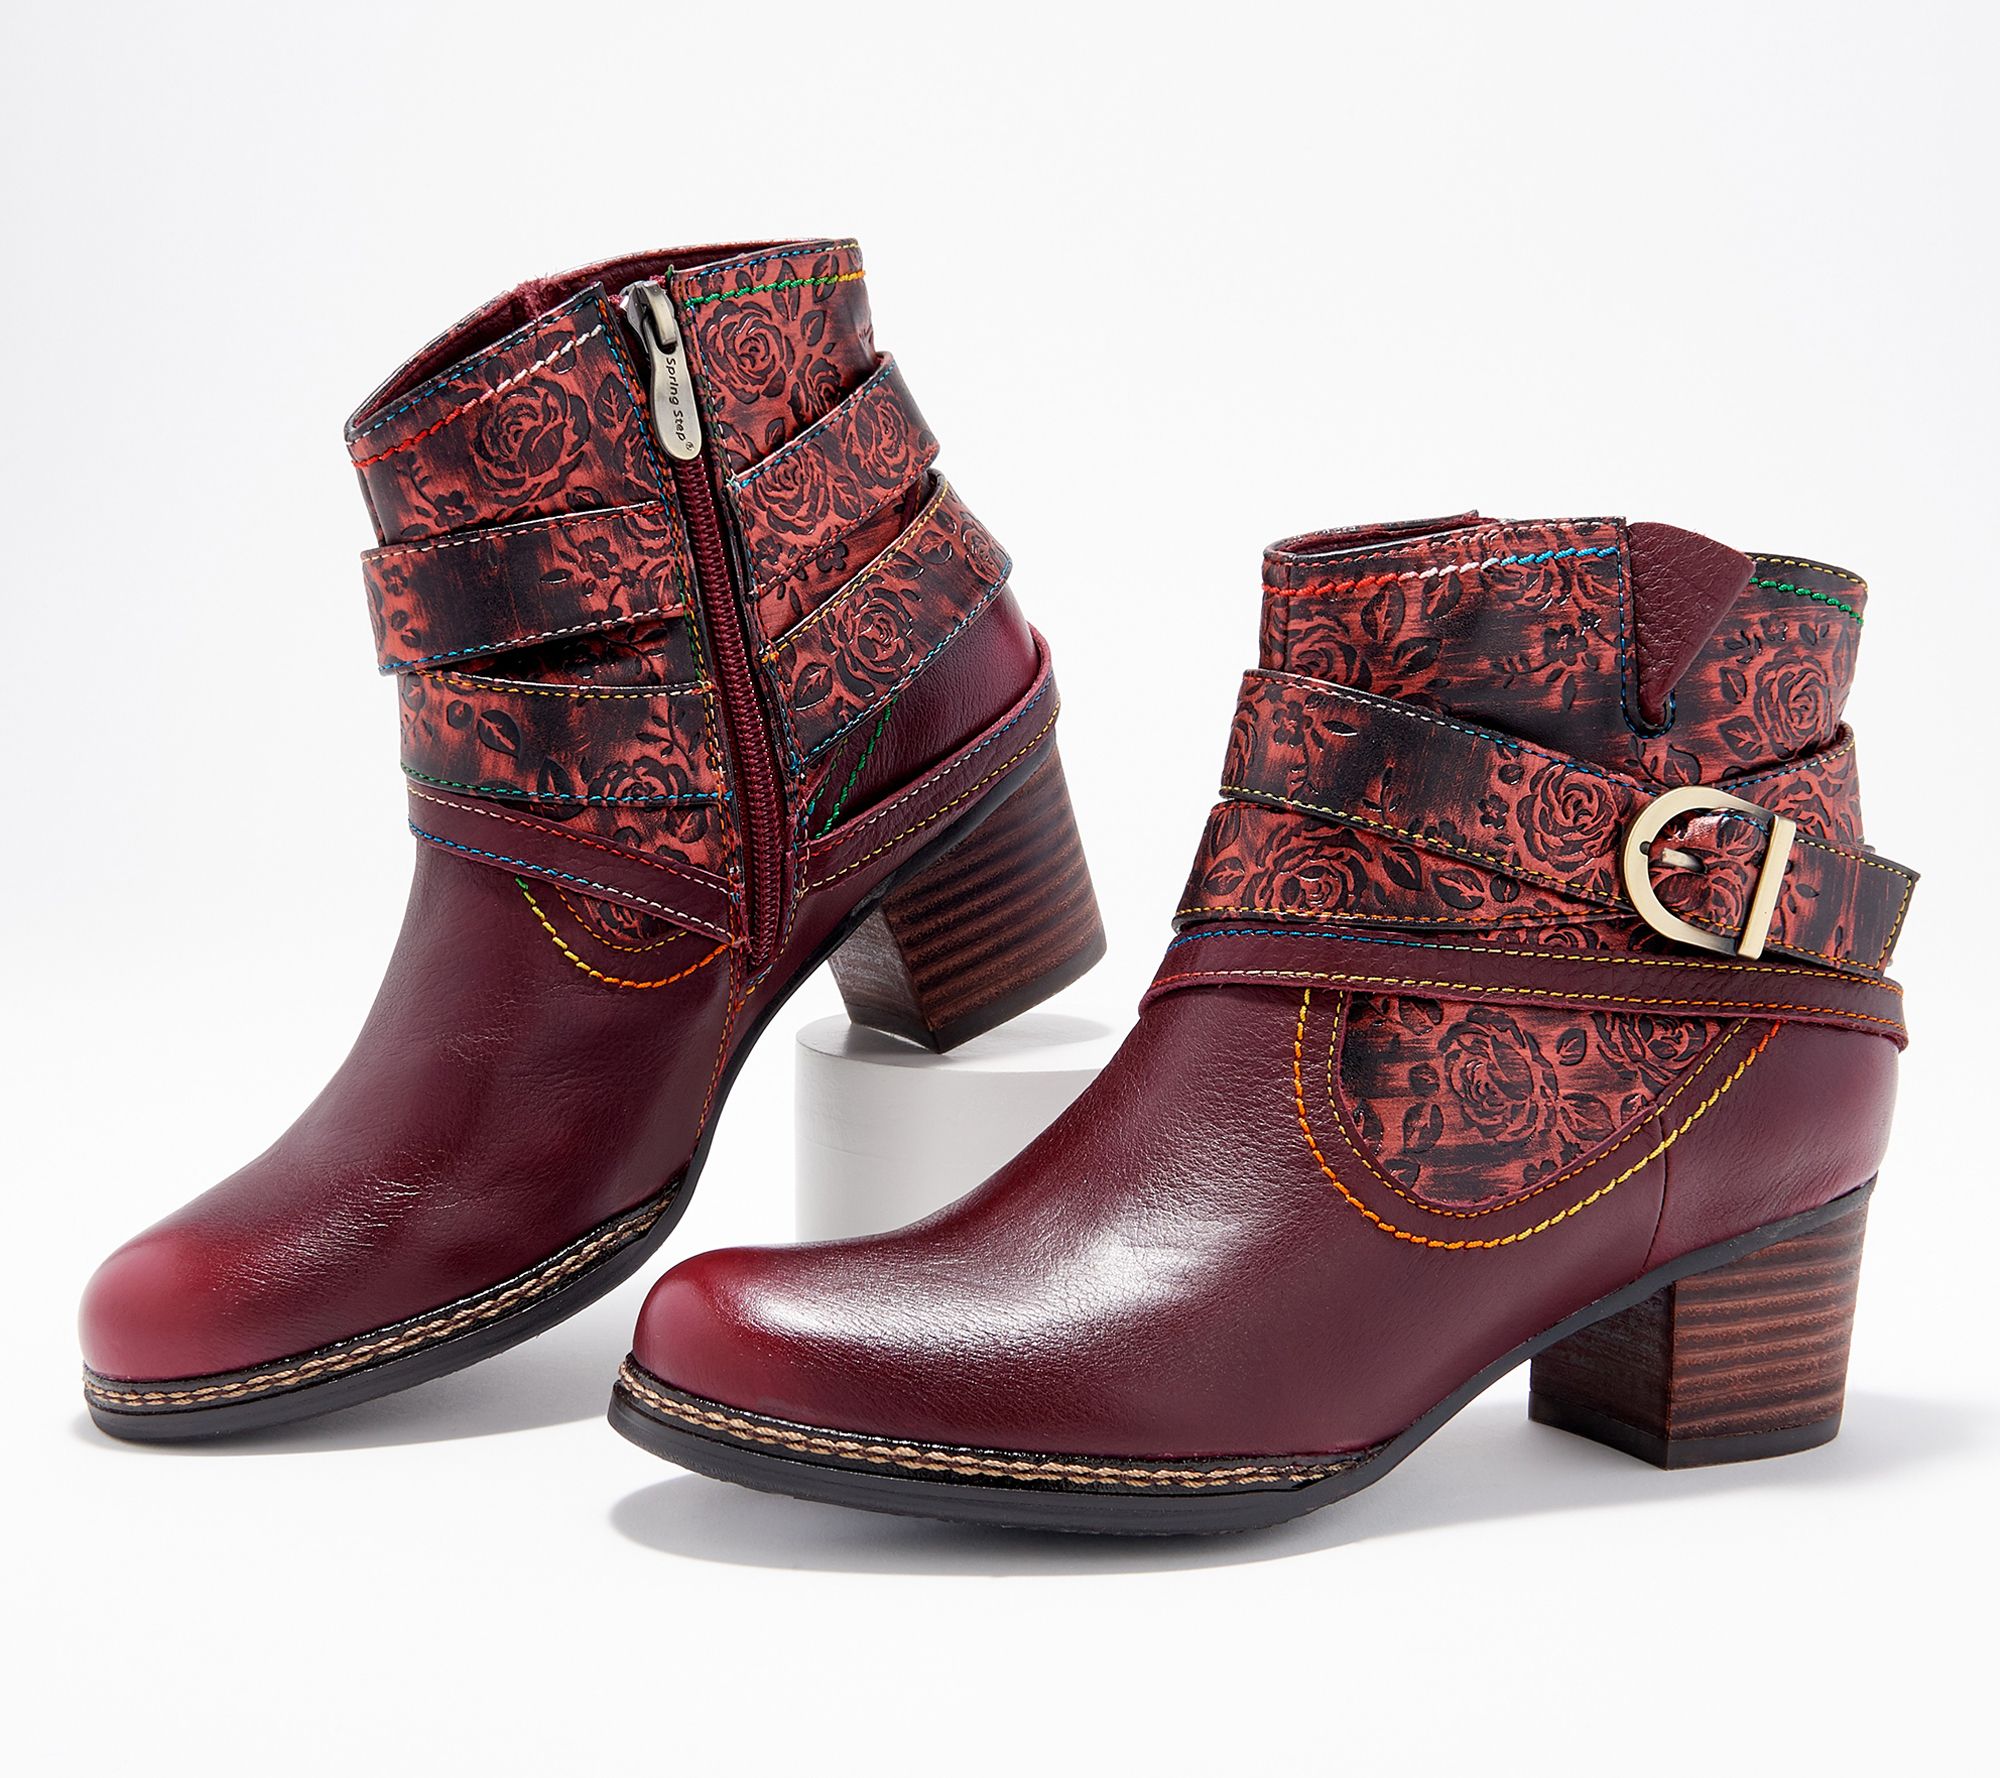 L'Artiste by Spring Step Leather Ankle Boots- Shazzam-Rose - QVC.com